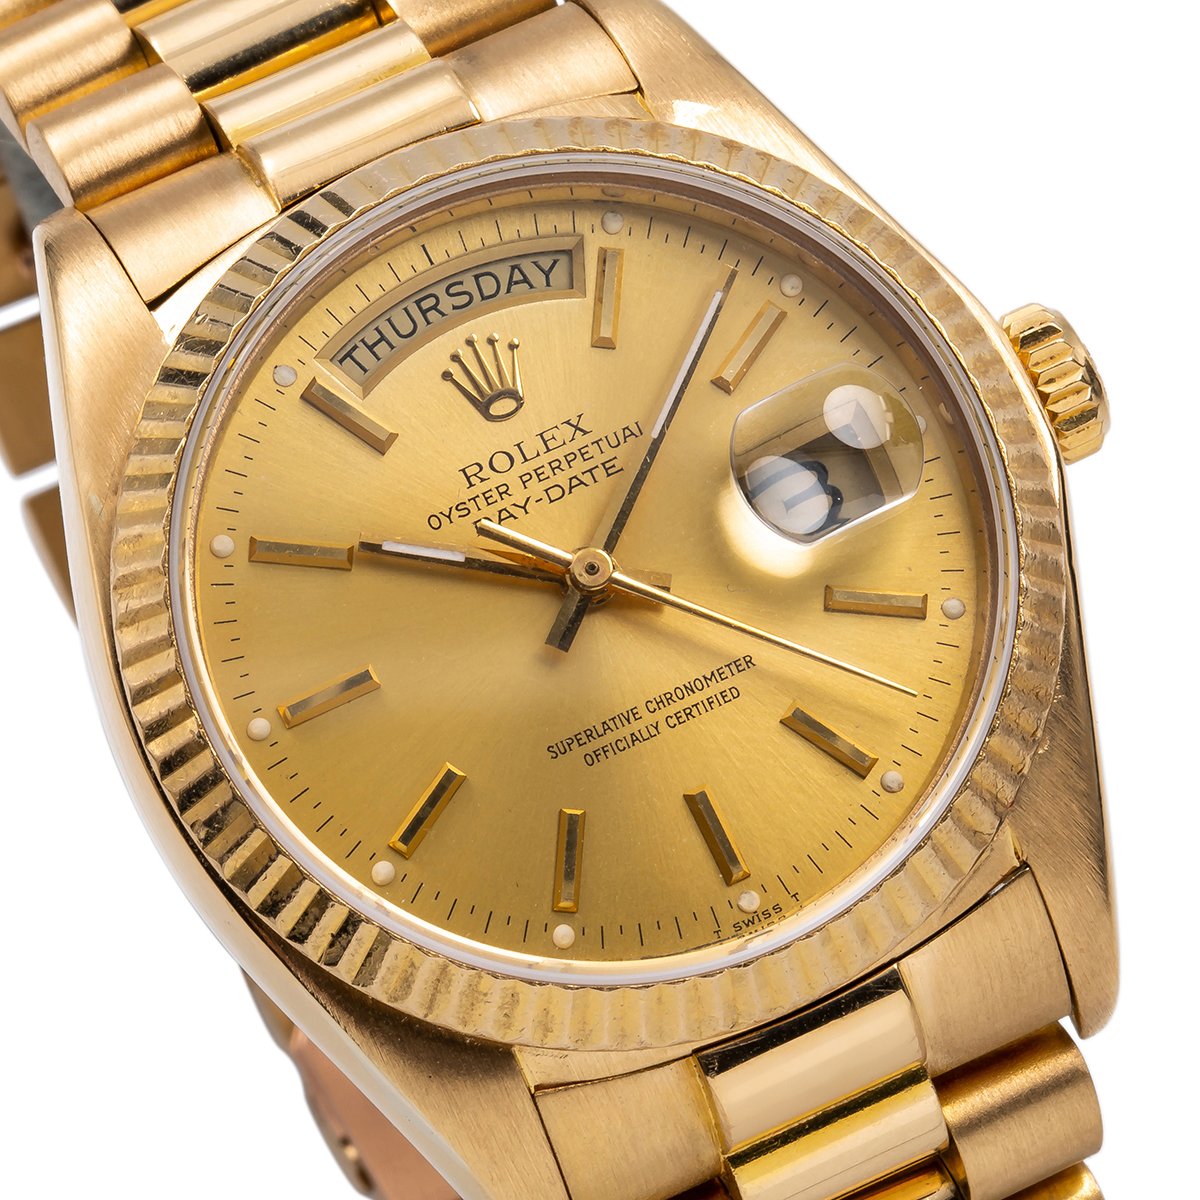 18K YELLOW GOLD ROLEX DAY-DATE 18038 